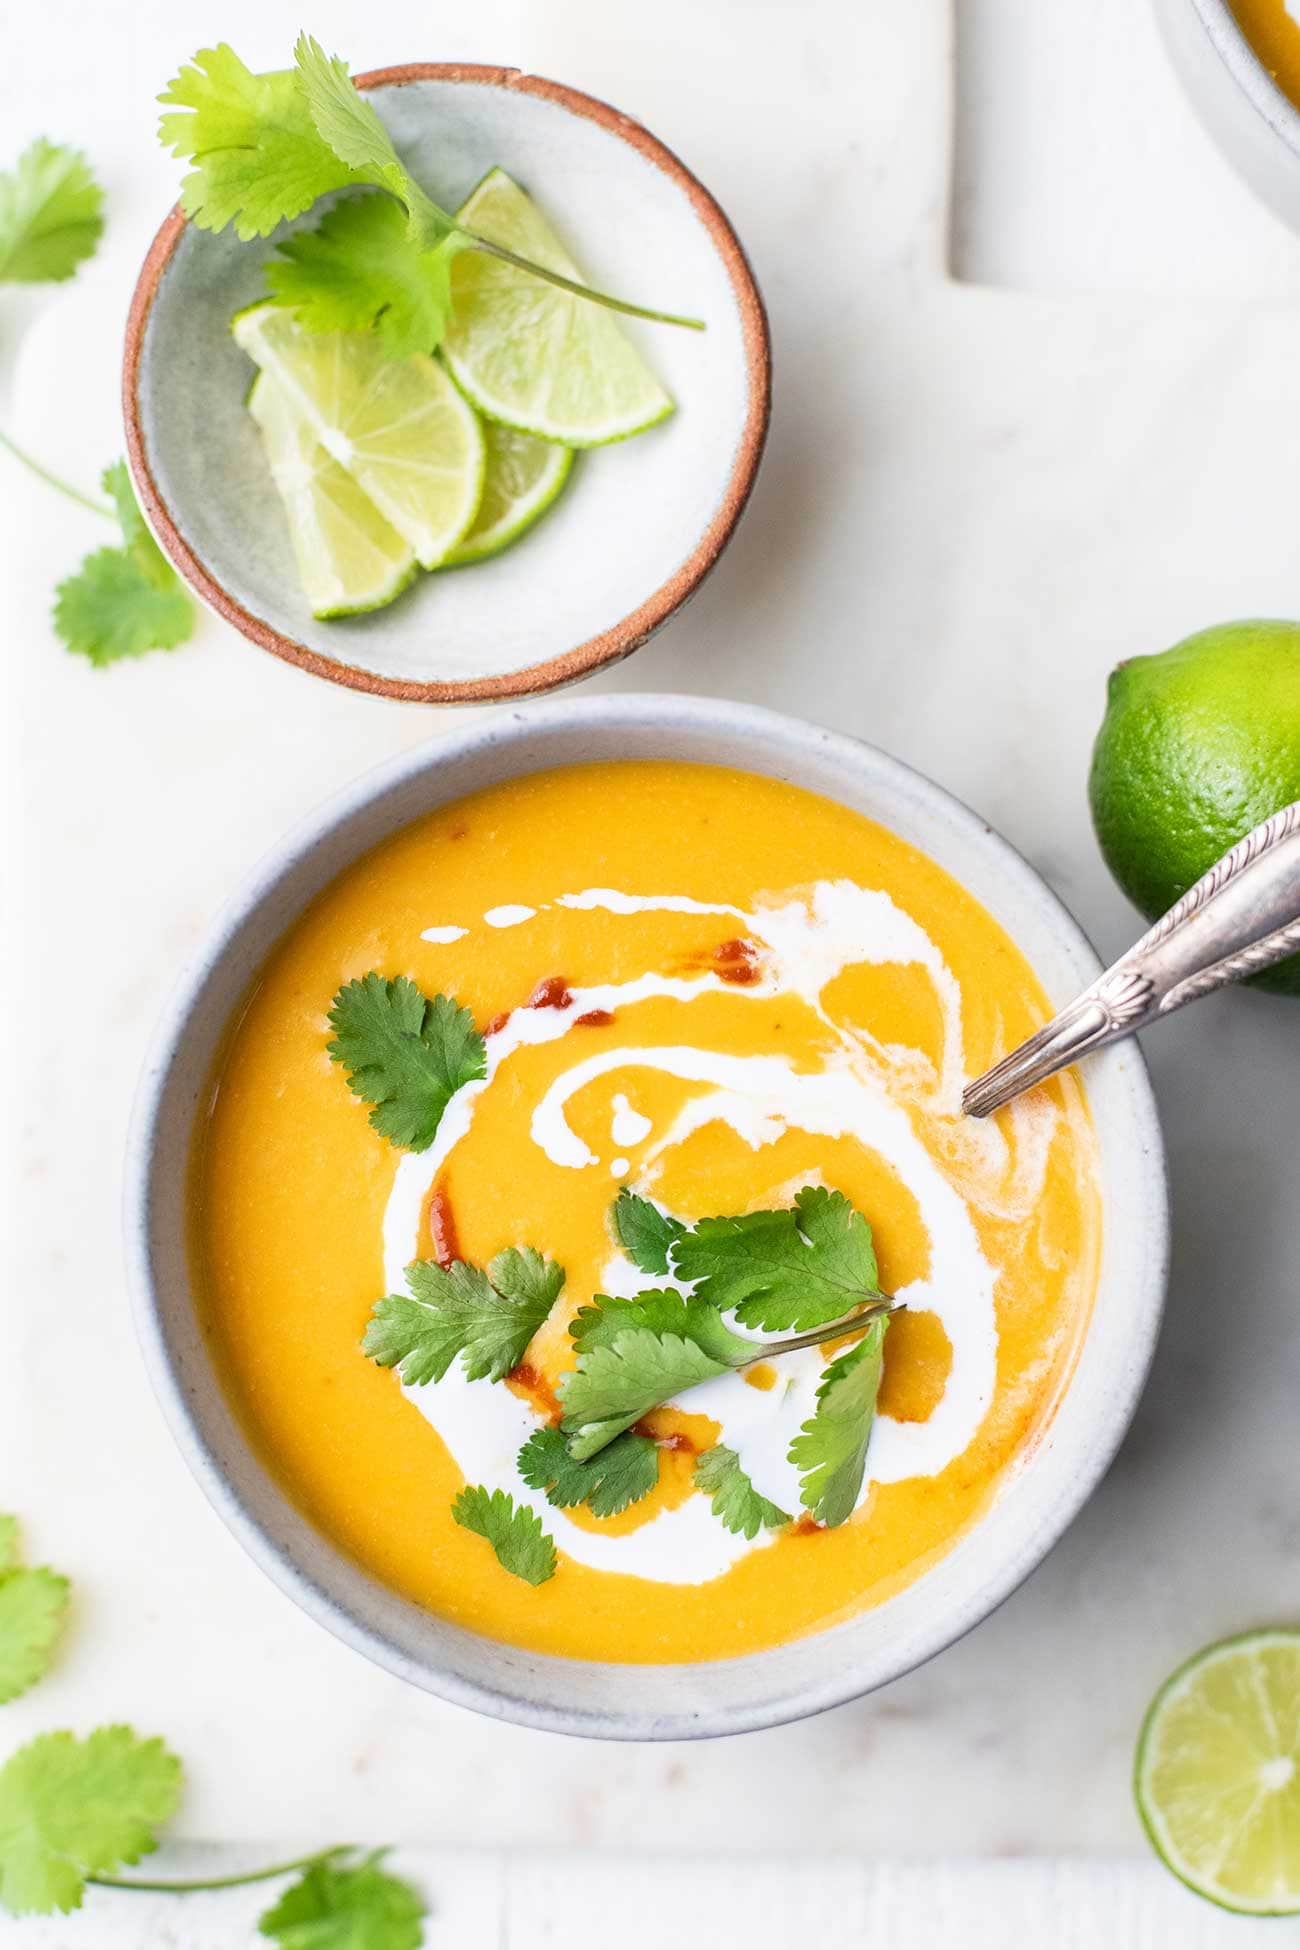 A bowl of Thai butternut squash soup garnished with cilantro and coconut milk, sitting next to a small bowl of limes.